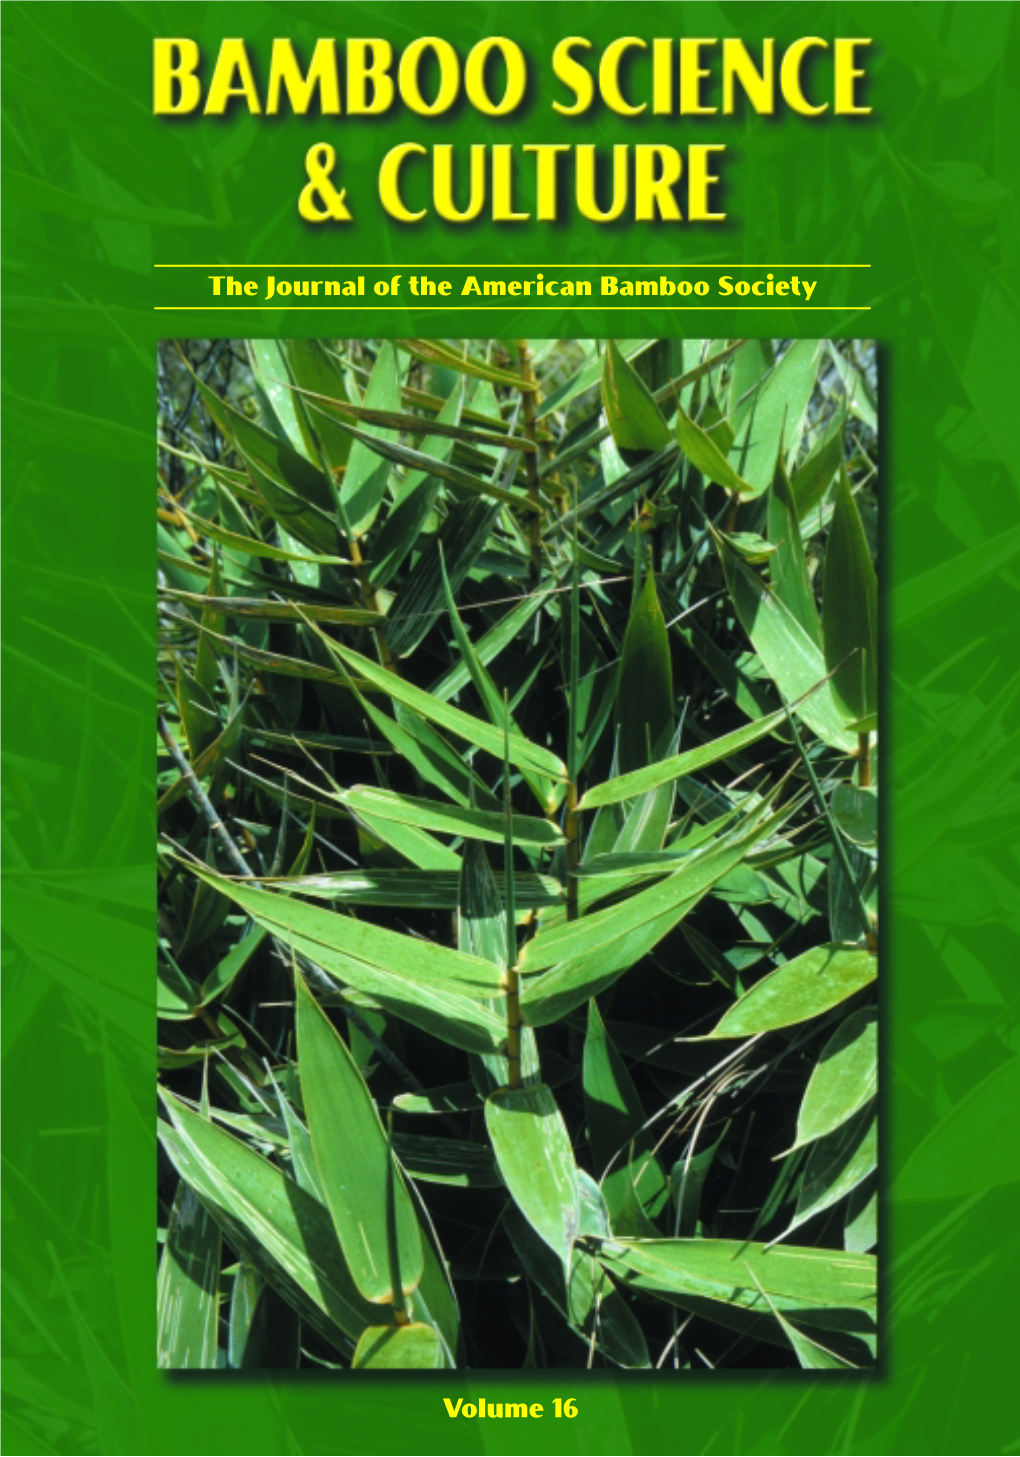 The Journal of the American Bamboo Society Volume 16